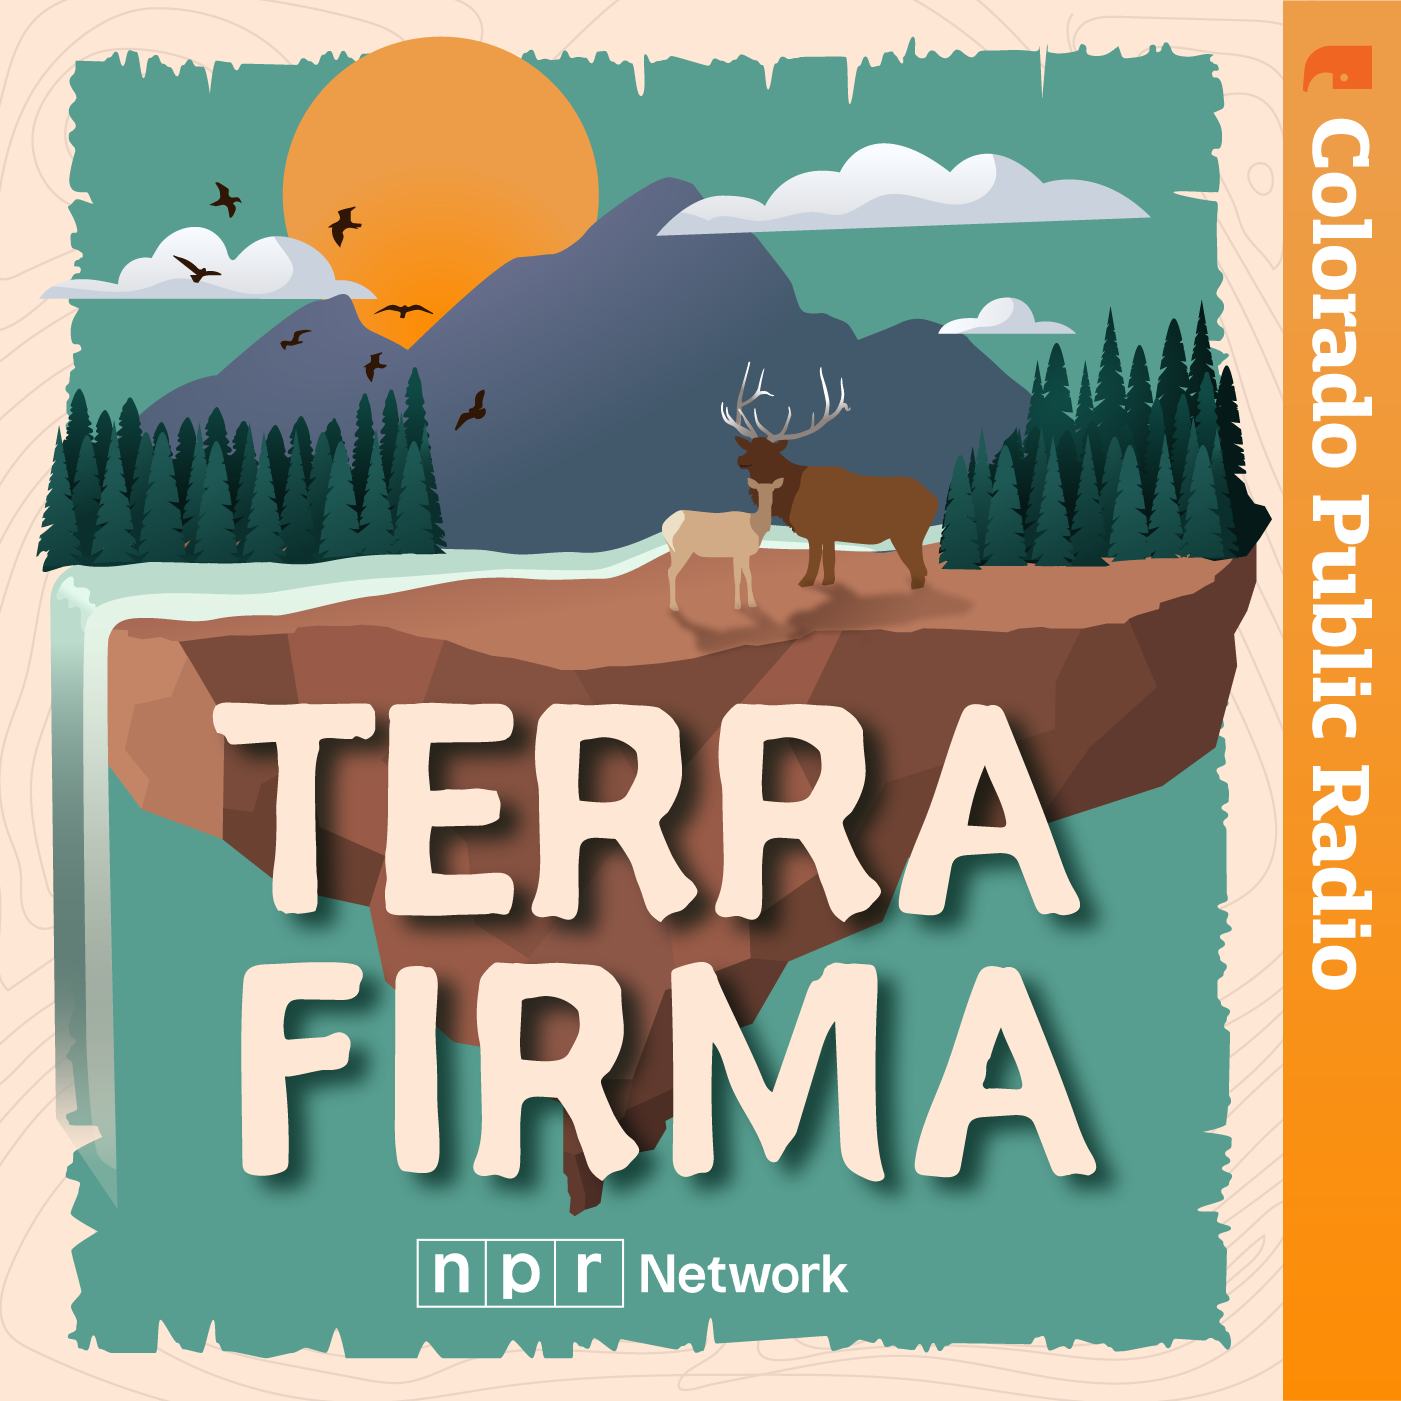 Thumbnail for "Welcome to Terra Firma".